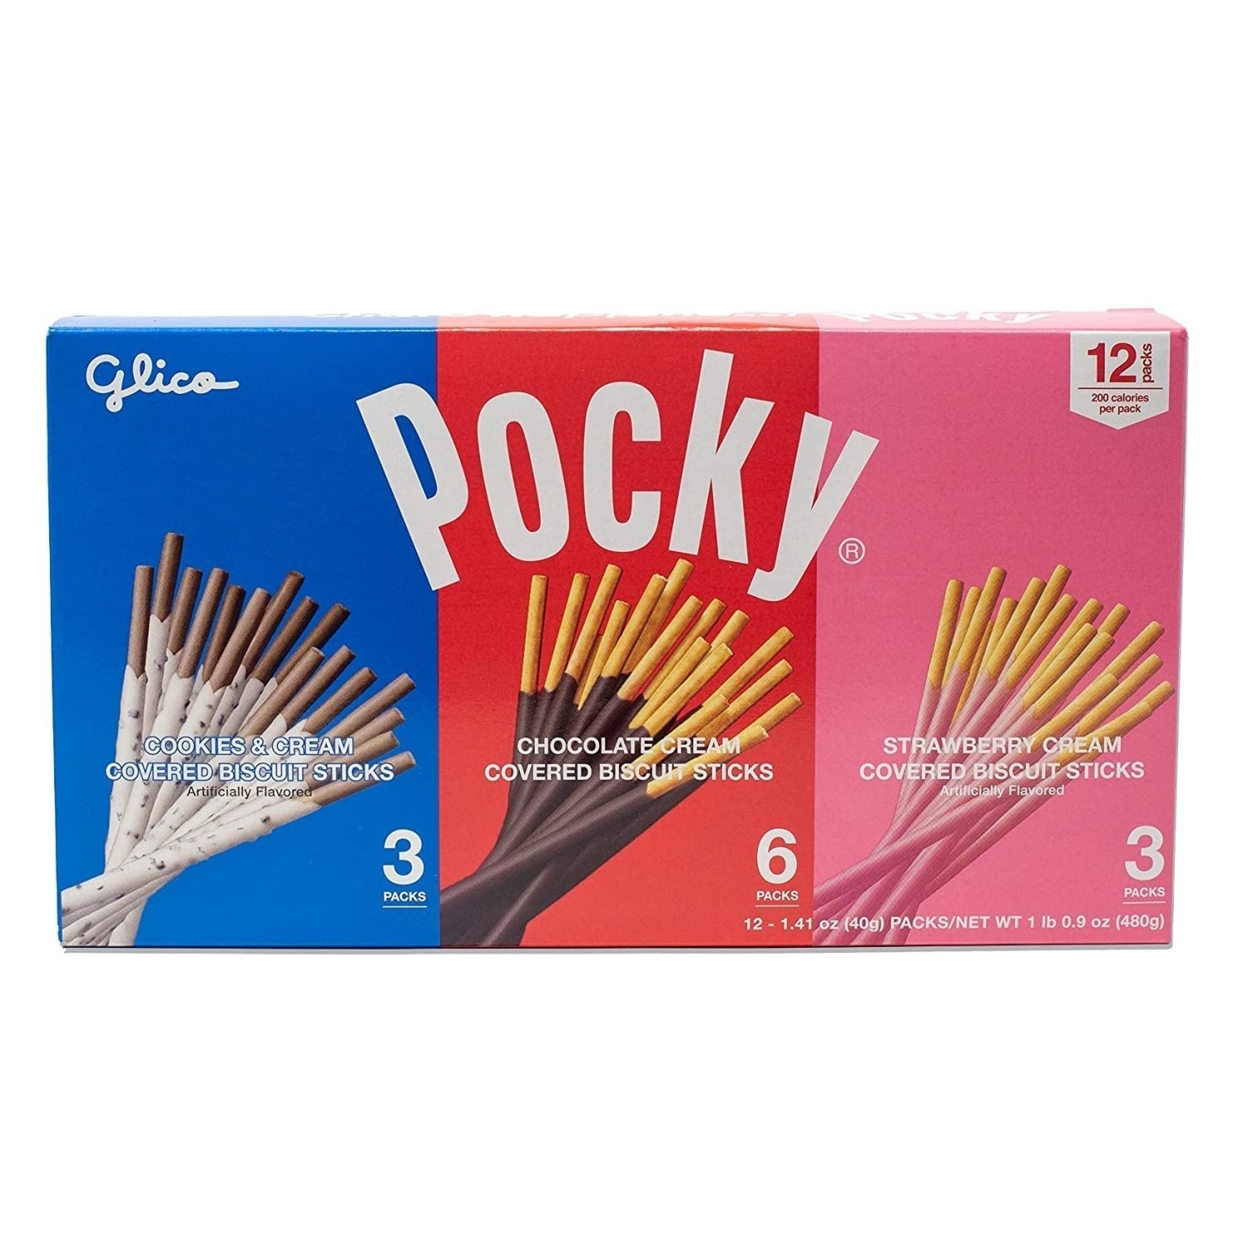 Glico Pocky Biscuit Sticks 3 Flavor Variety, 1.41 Ounce (Pack Of 12)